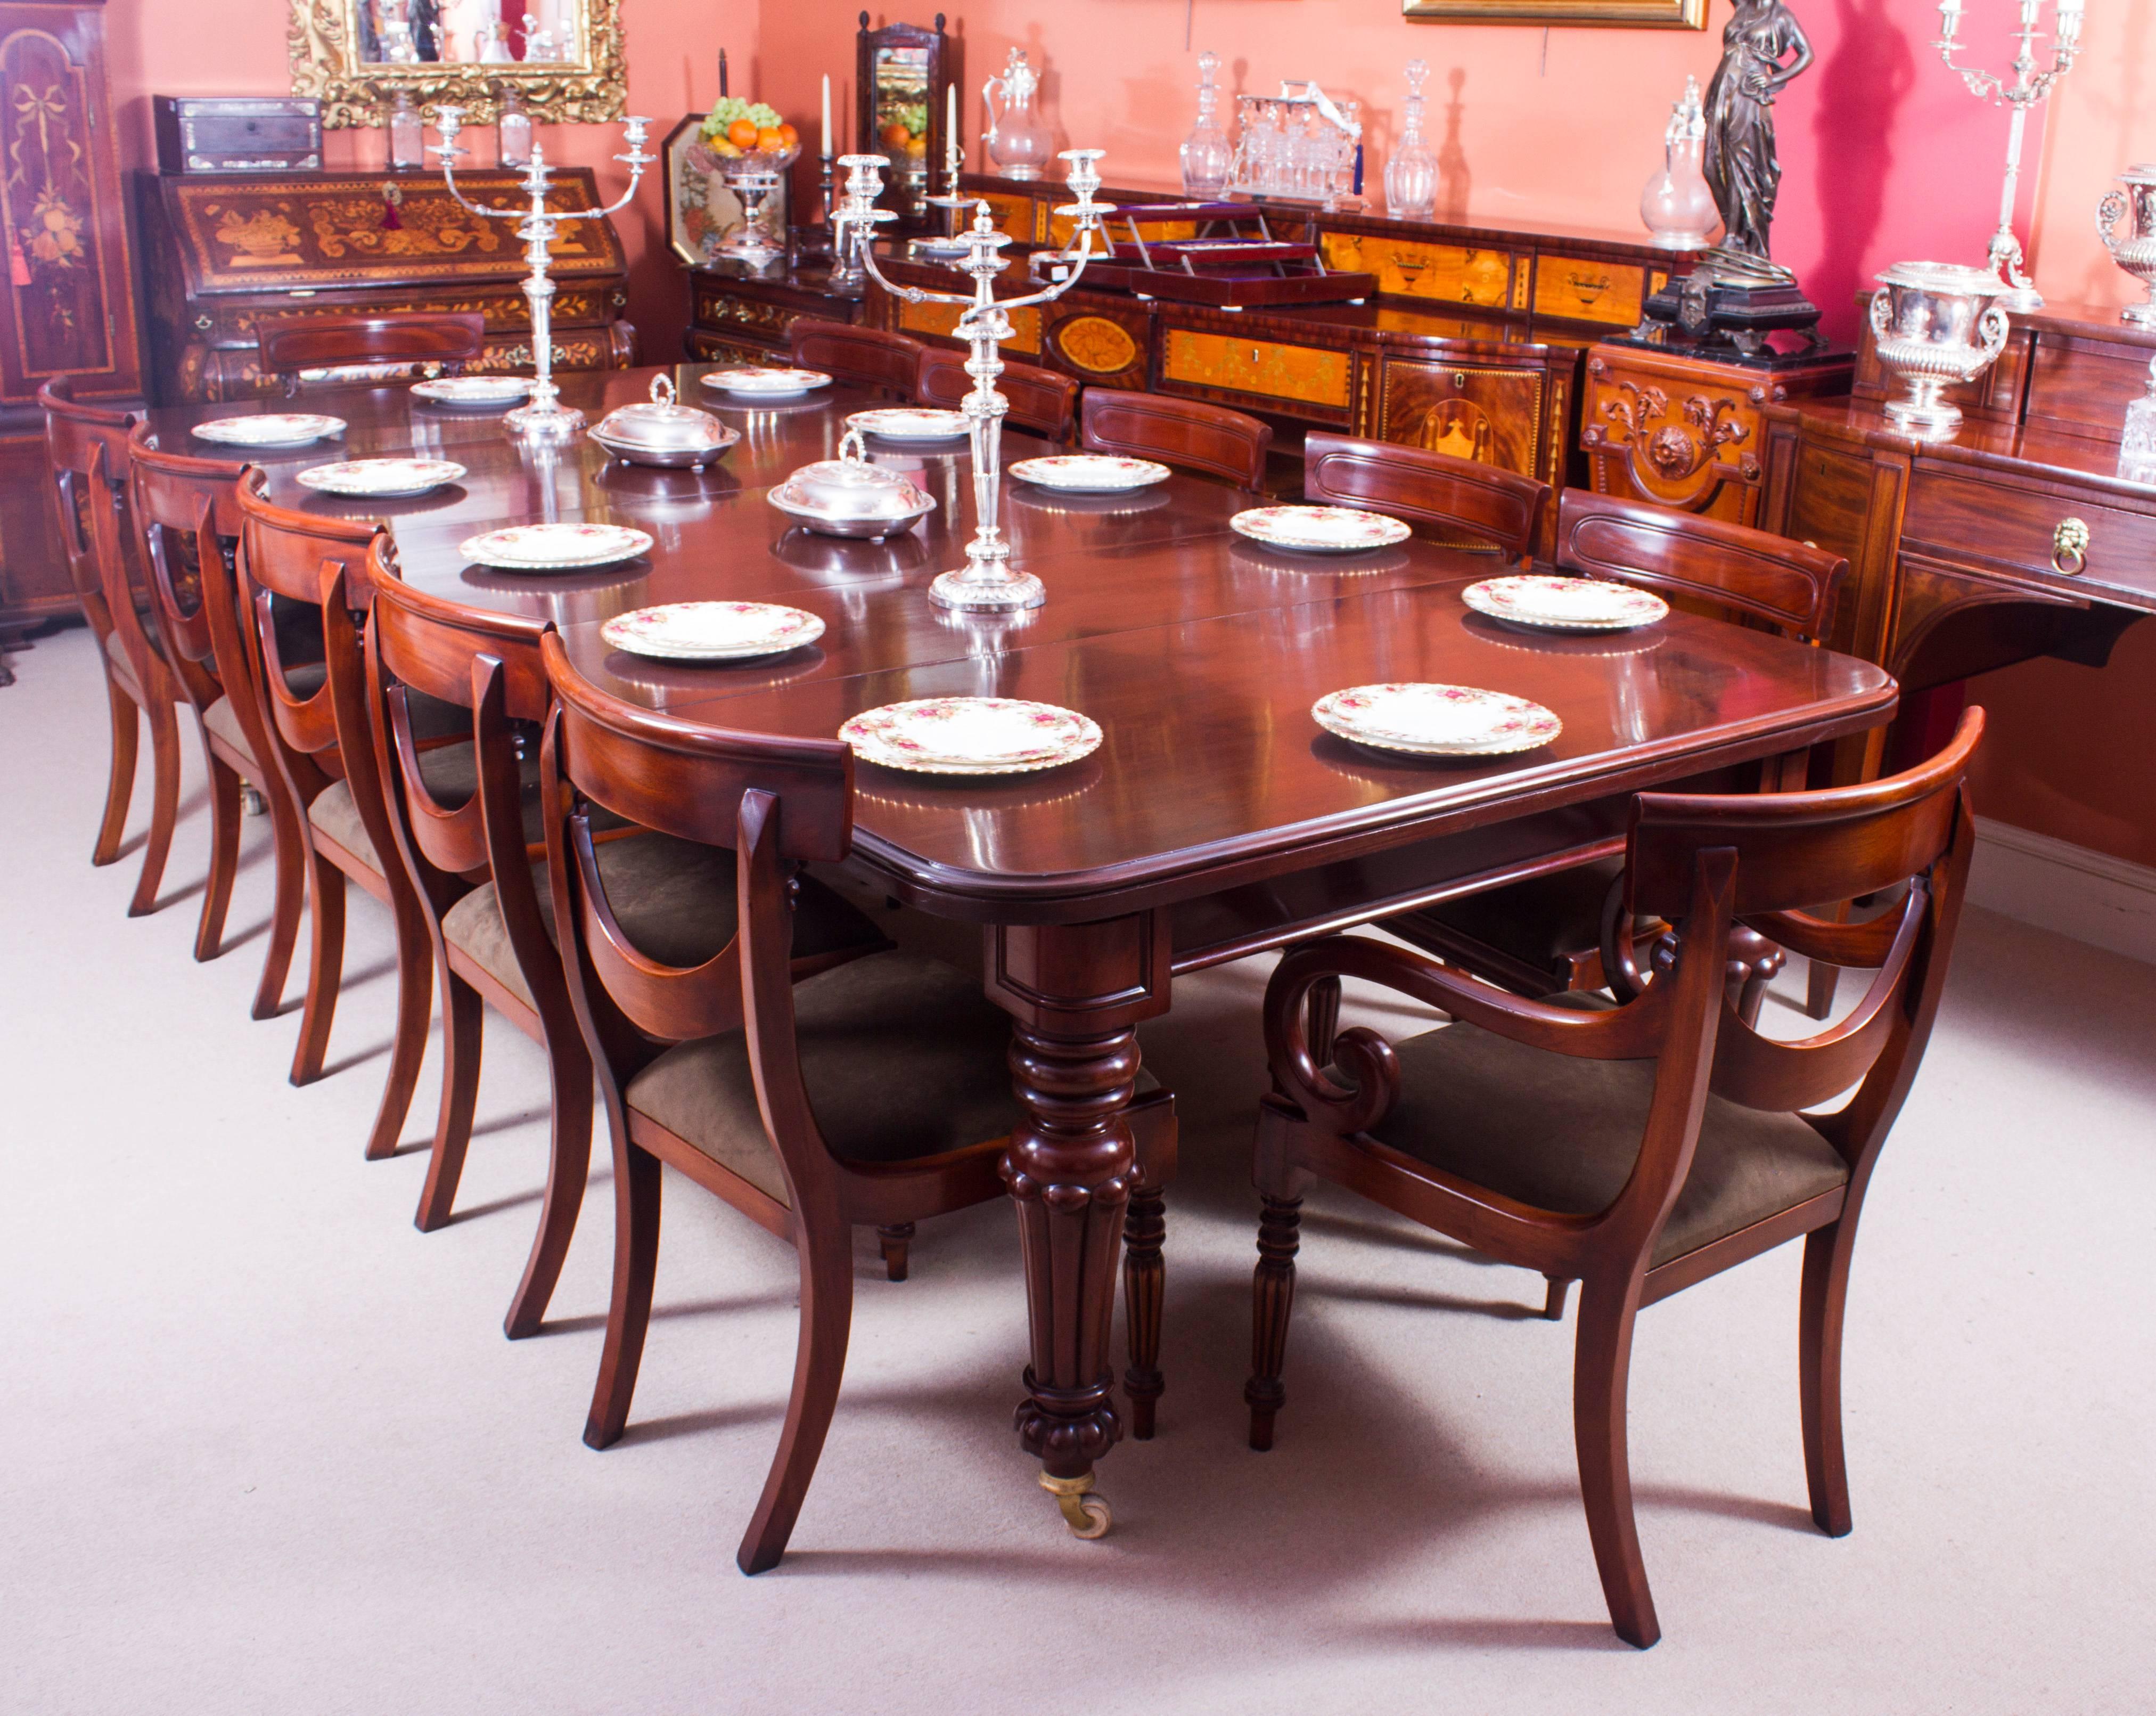 This is a beautiful antique early Victorian flame mahogany extending dining table, circa 1840 in date.
This amazing table can sit twelve people in comfort and has been hand-crafted from solid mahogany which has a beautiful grain and is in really